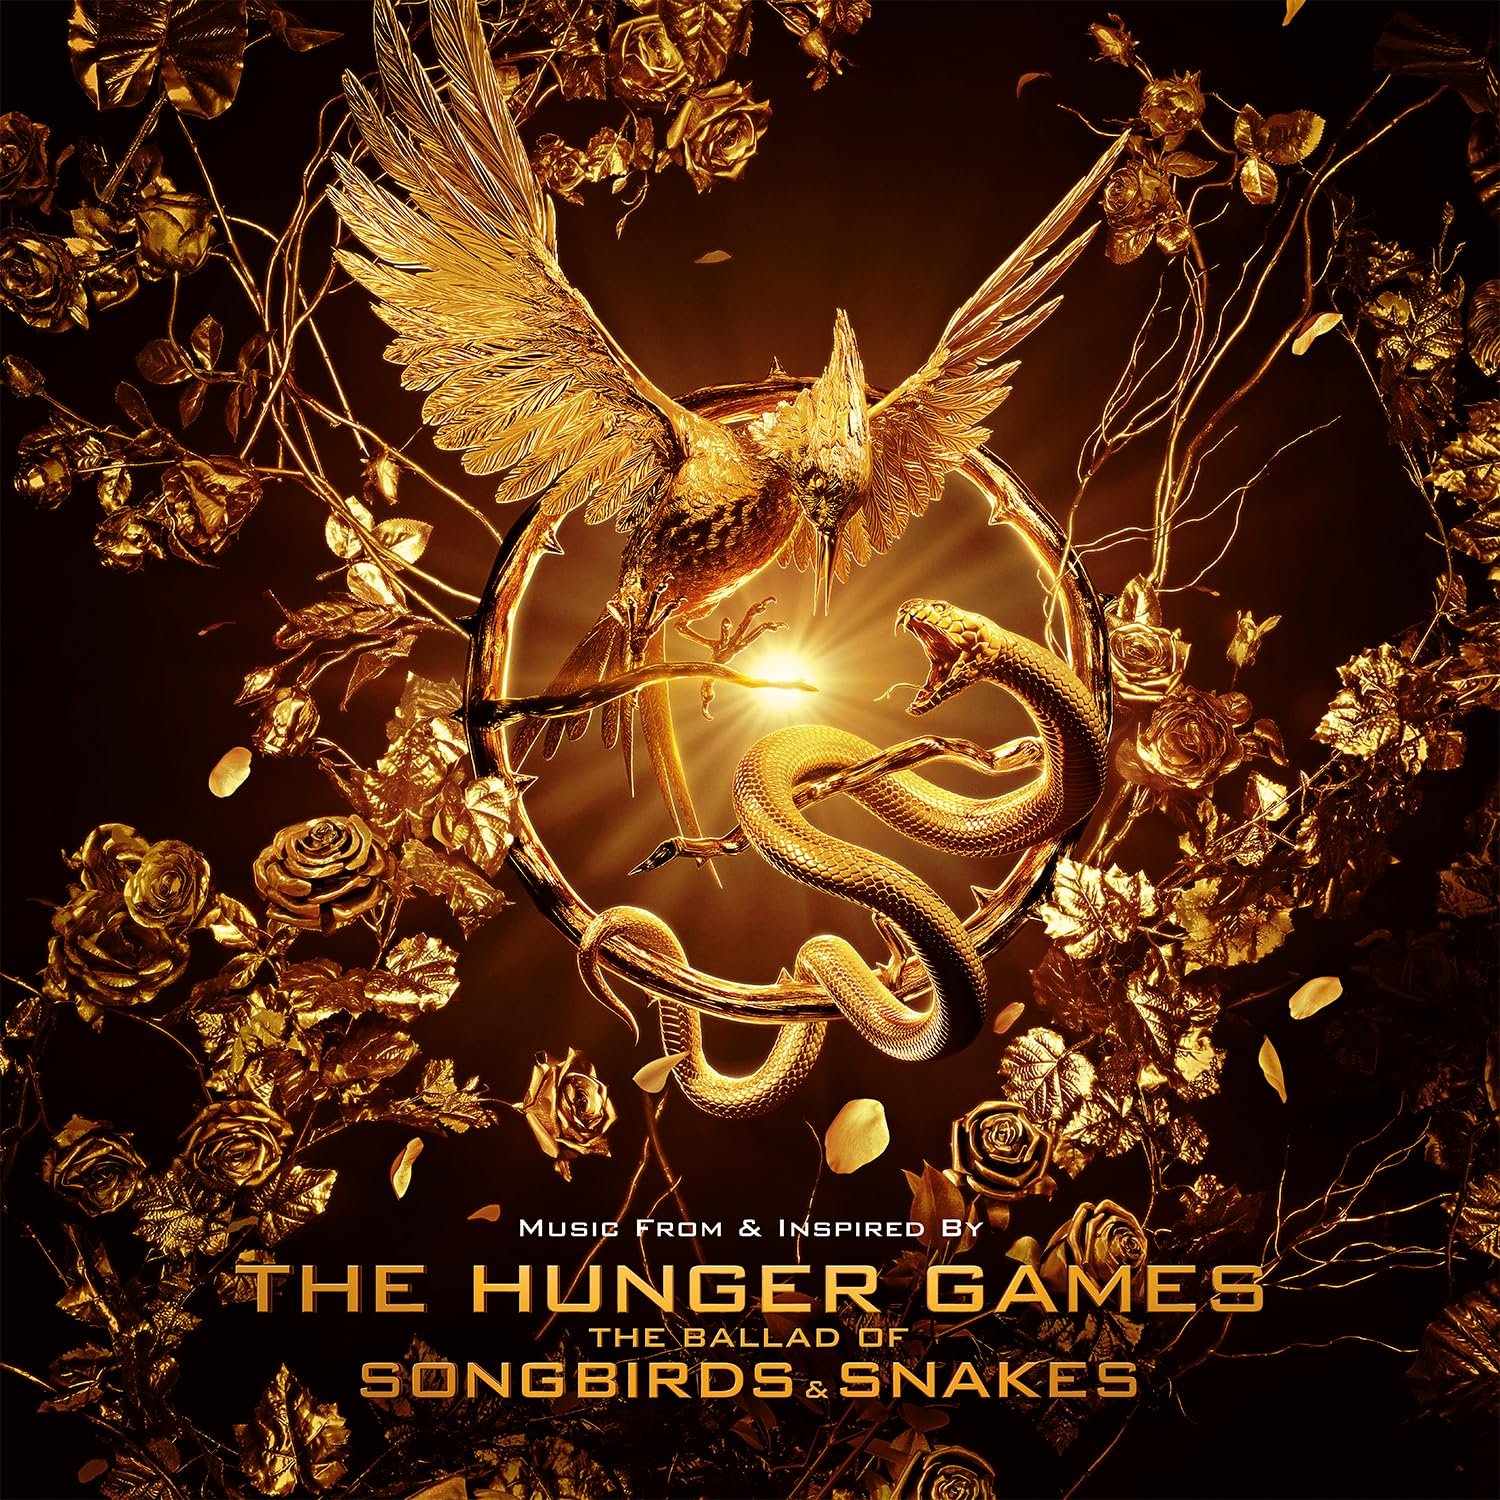 Hunger Games Ballad Of Songbirds and Snakes.jpeg